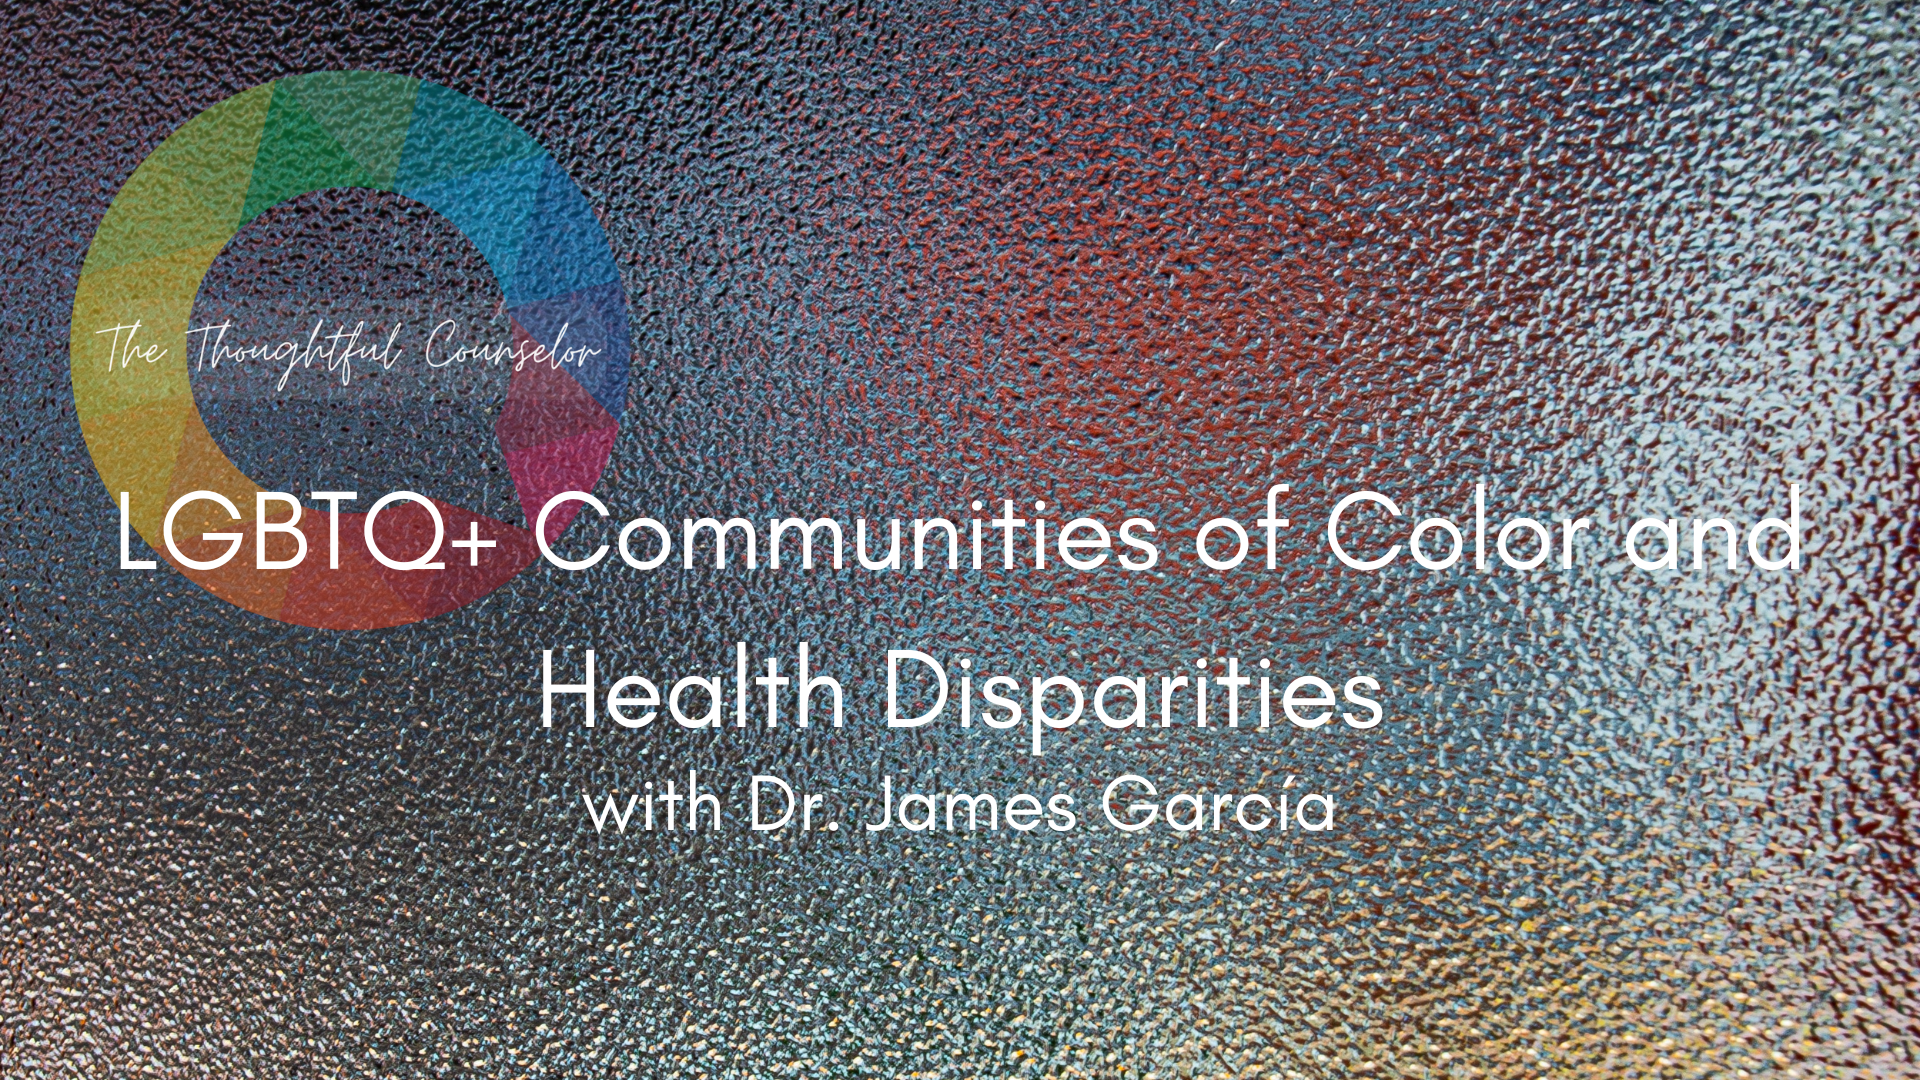 LGBTQ+ Communities of Color and Health Disparities